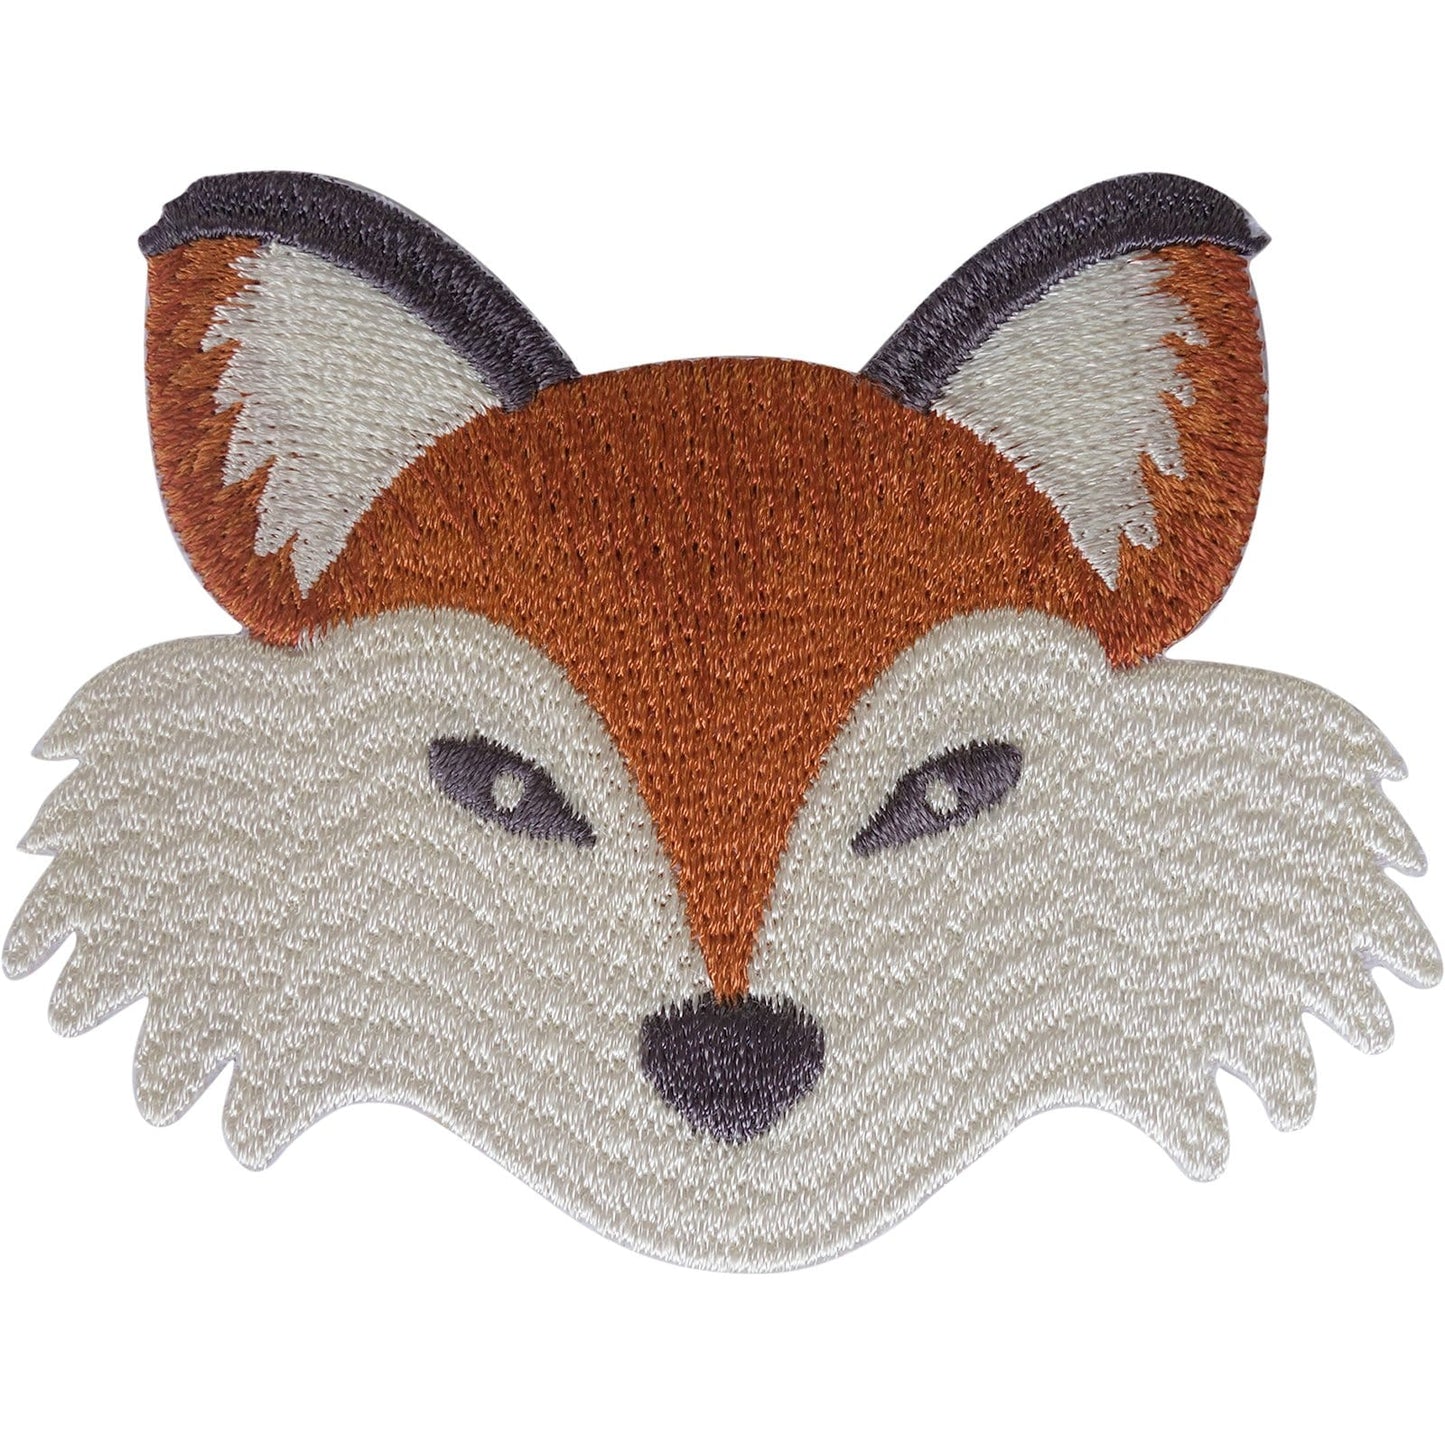 Fox Patch Iron Sew On Clothes Bag Animal Embroidery Applique Embroidered Badge